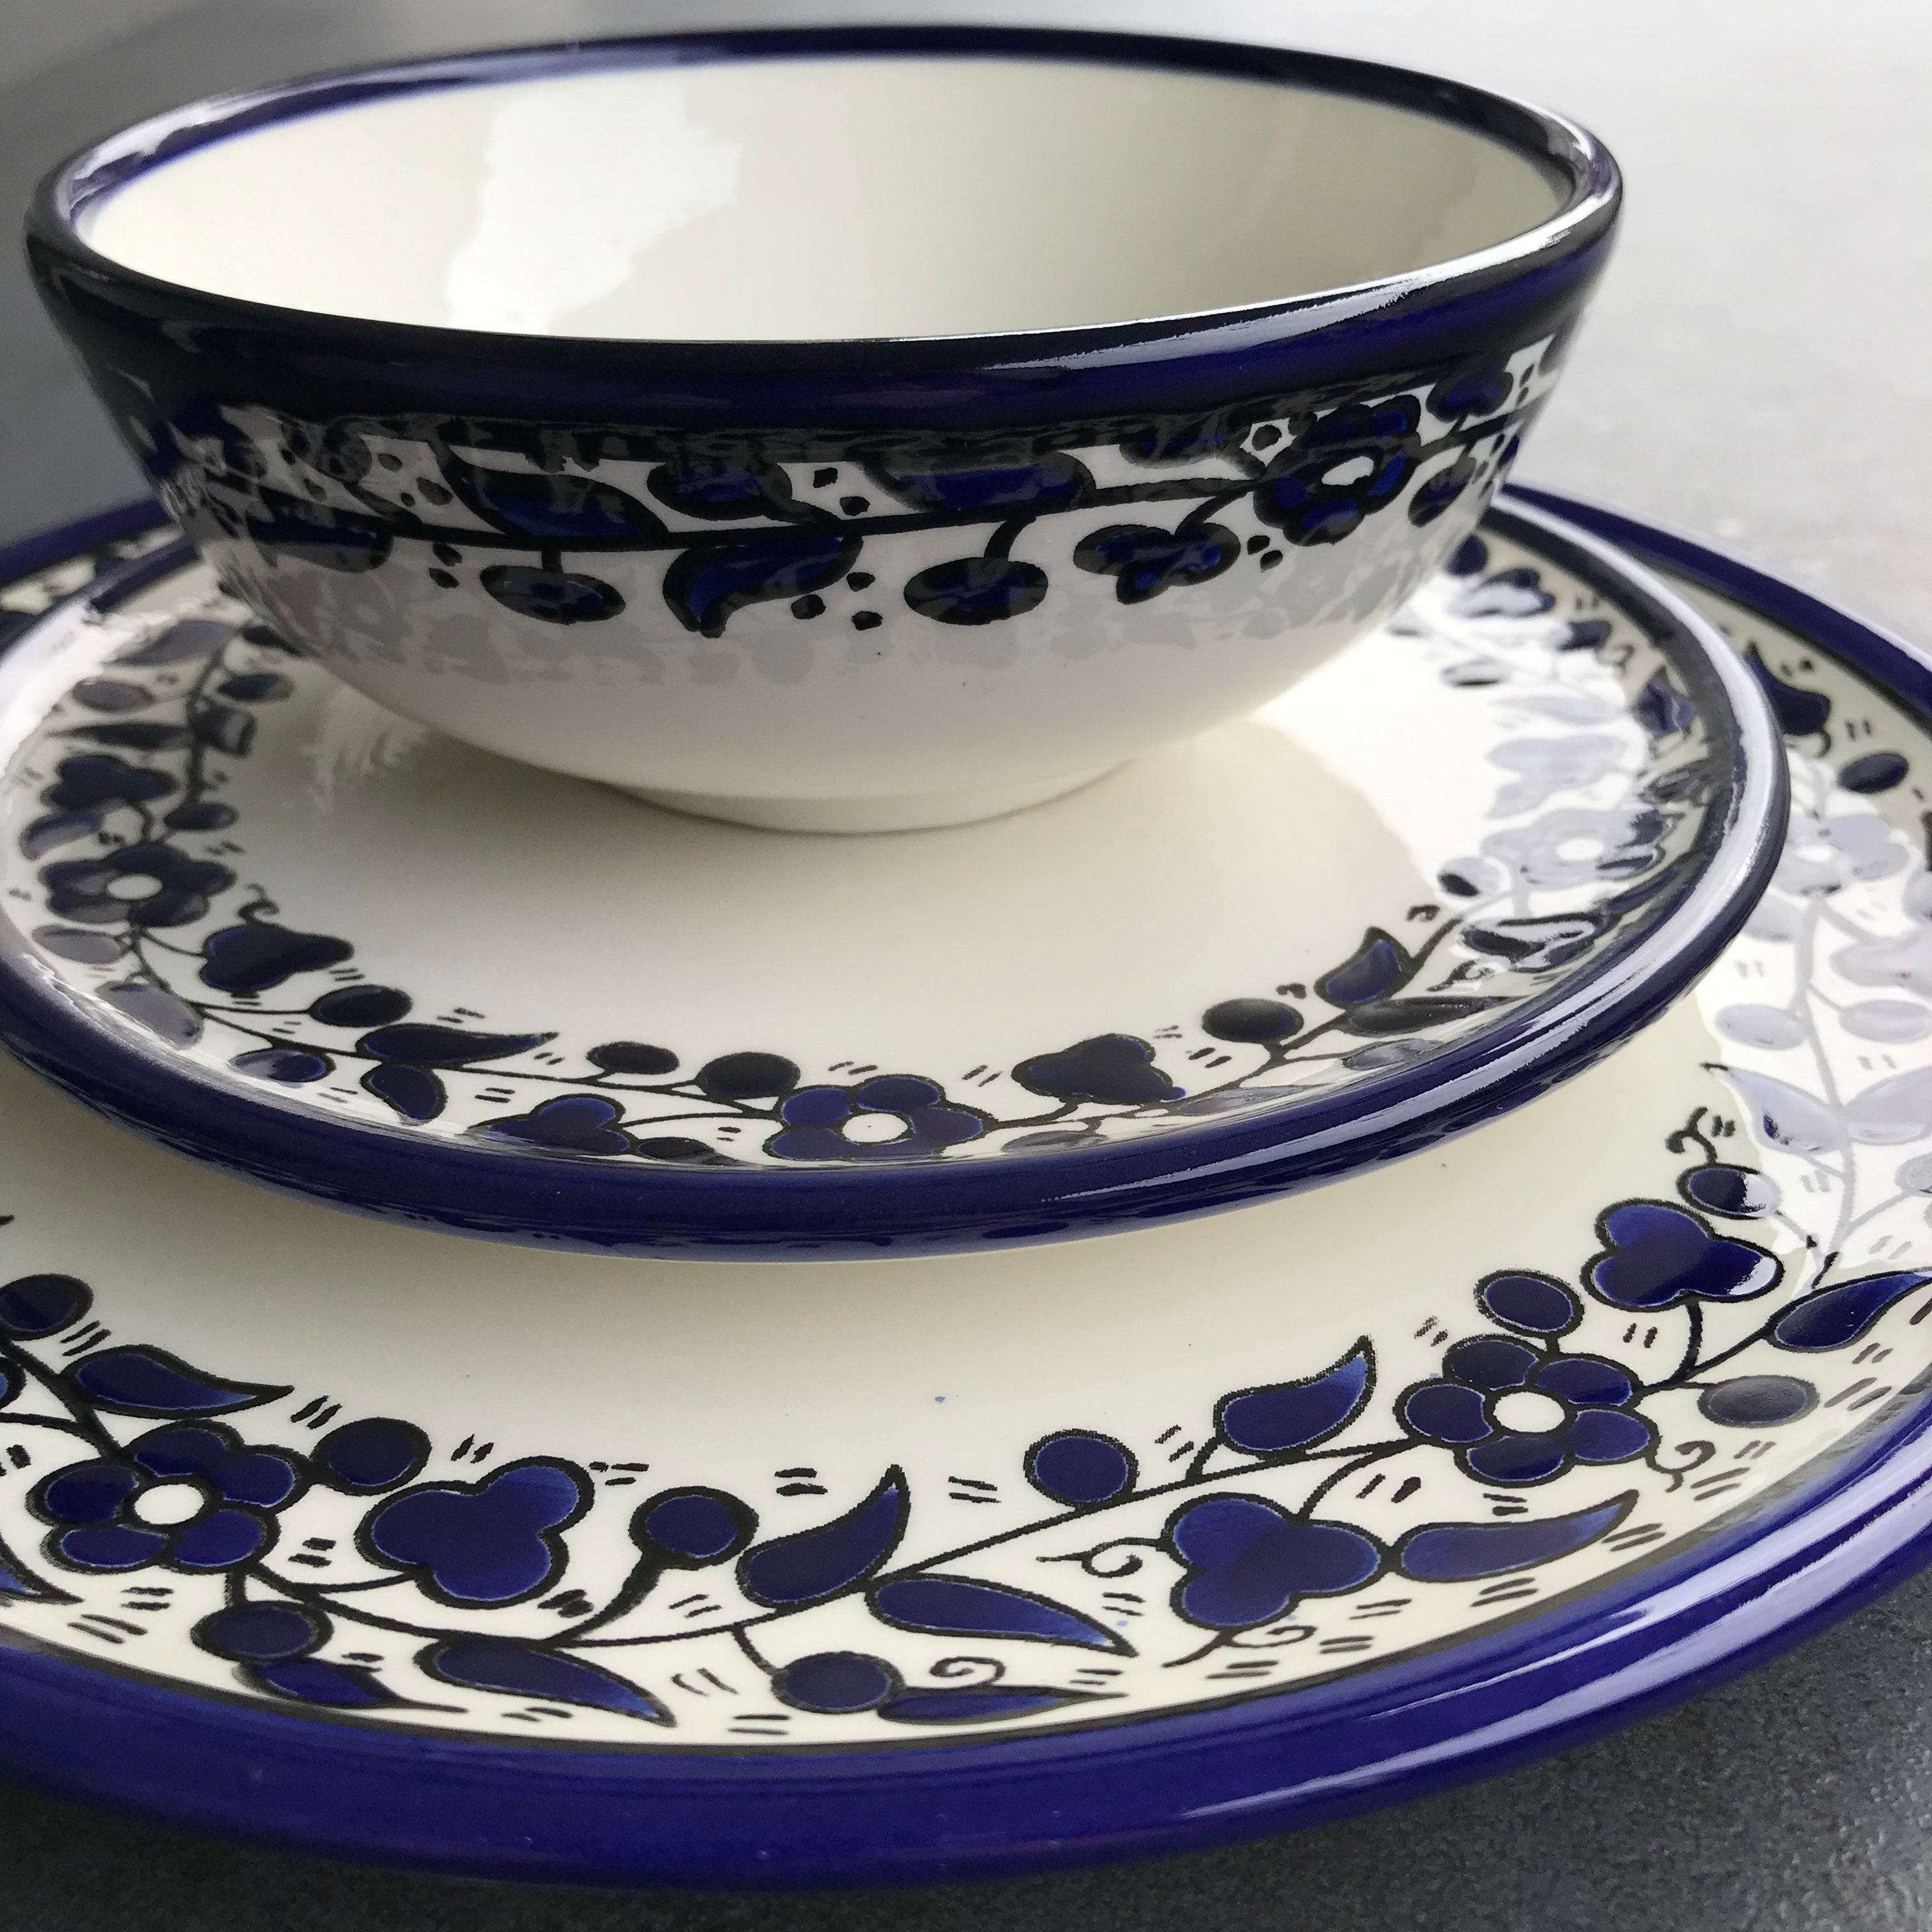 Crockery Set With Hand-painted Blue and White Flowers, Table